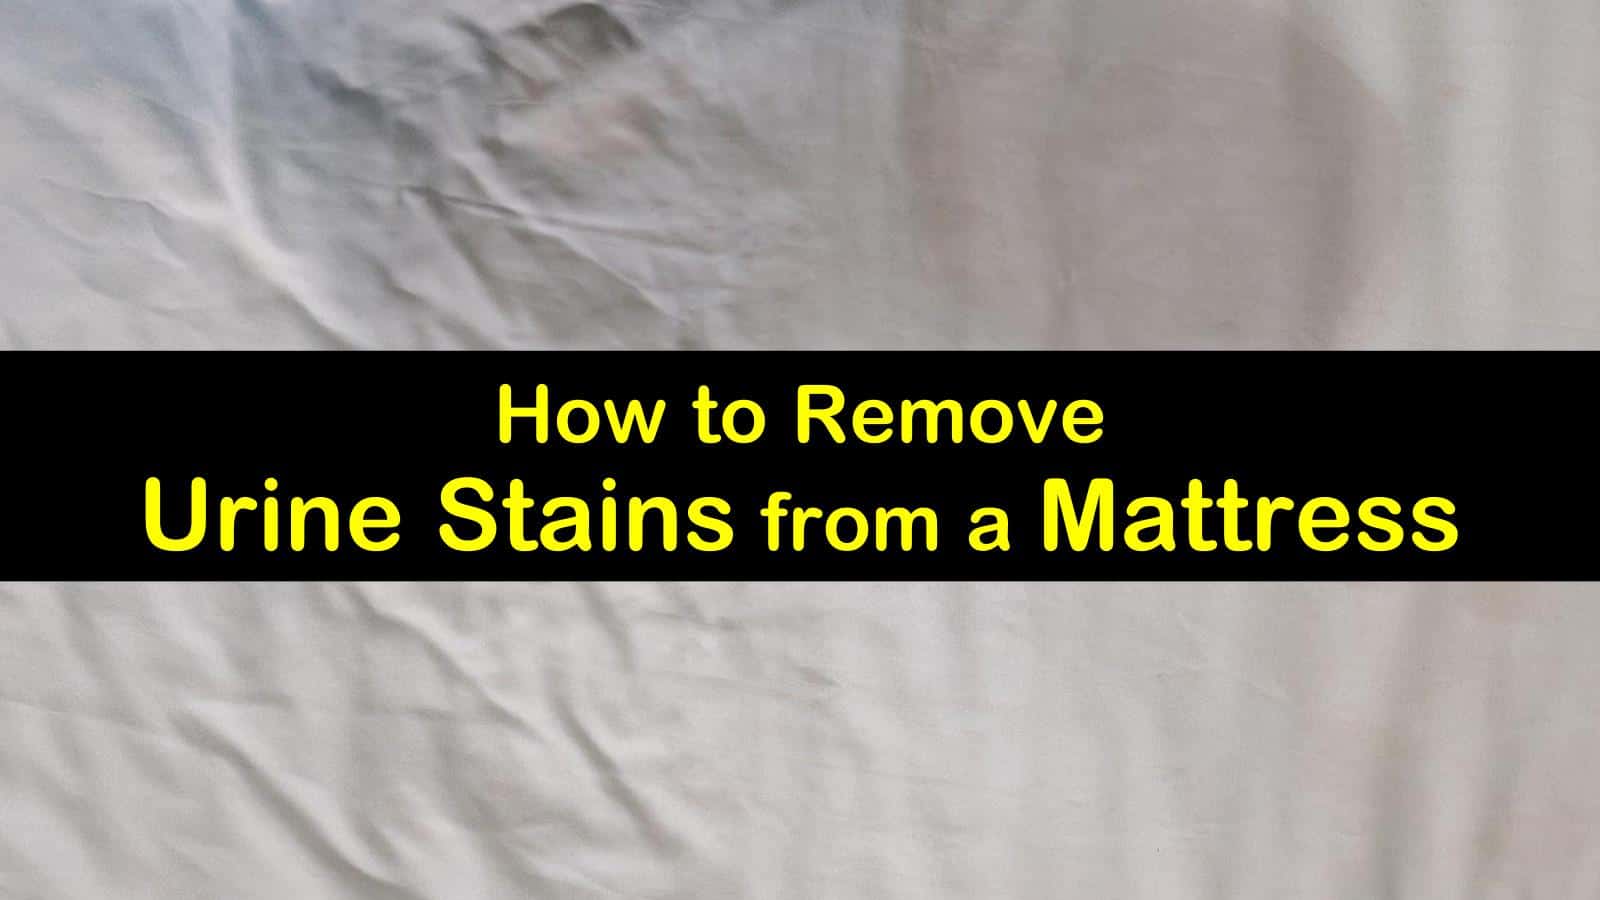 how to remove urine stains from a mattress titleimg1